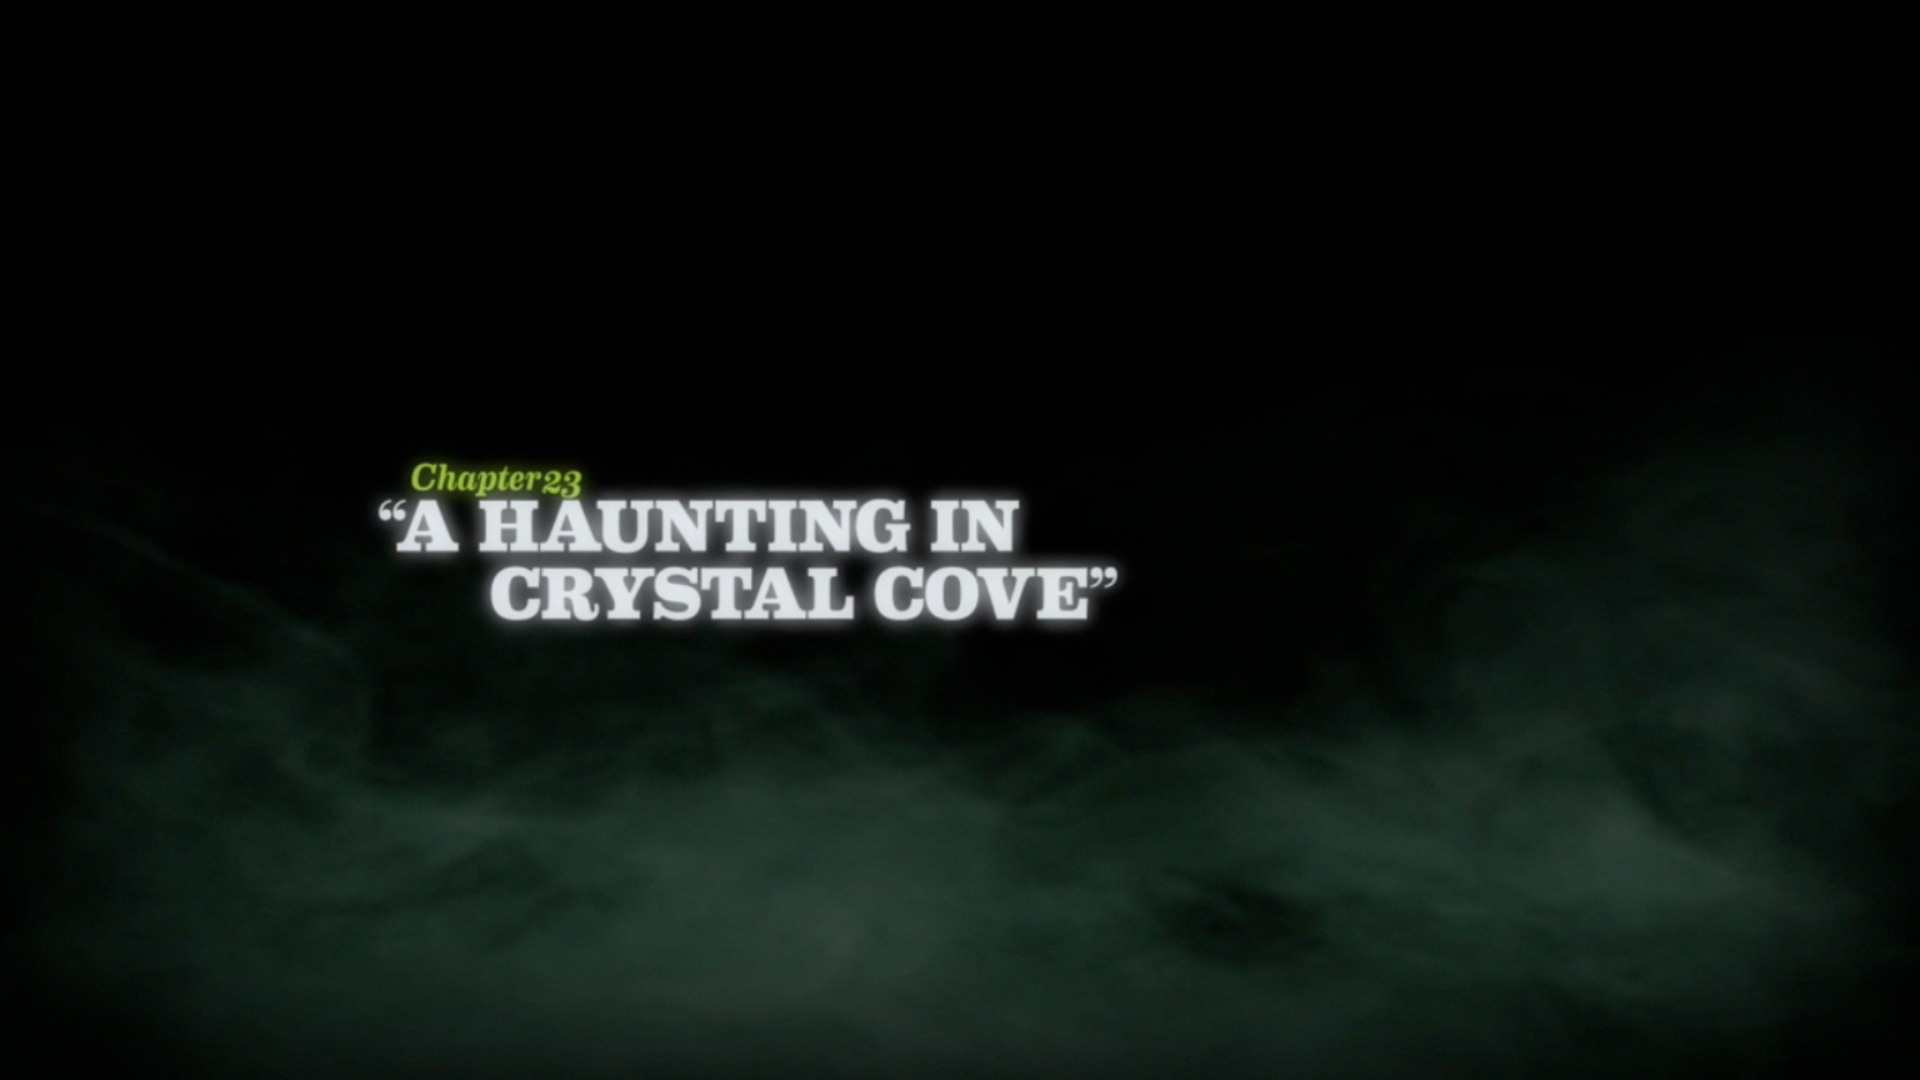 A_Haunting_in_Crystal_Cove_title_card